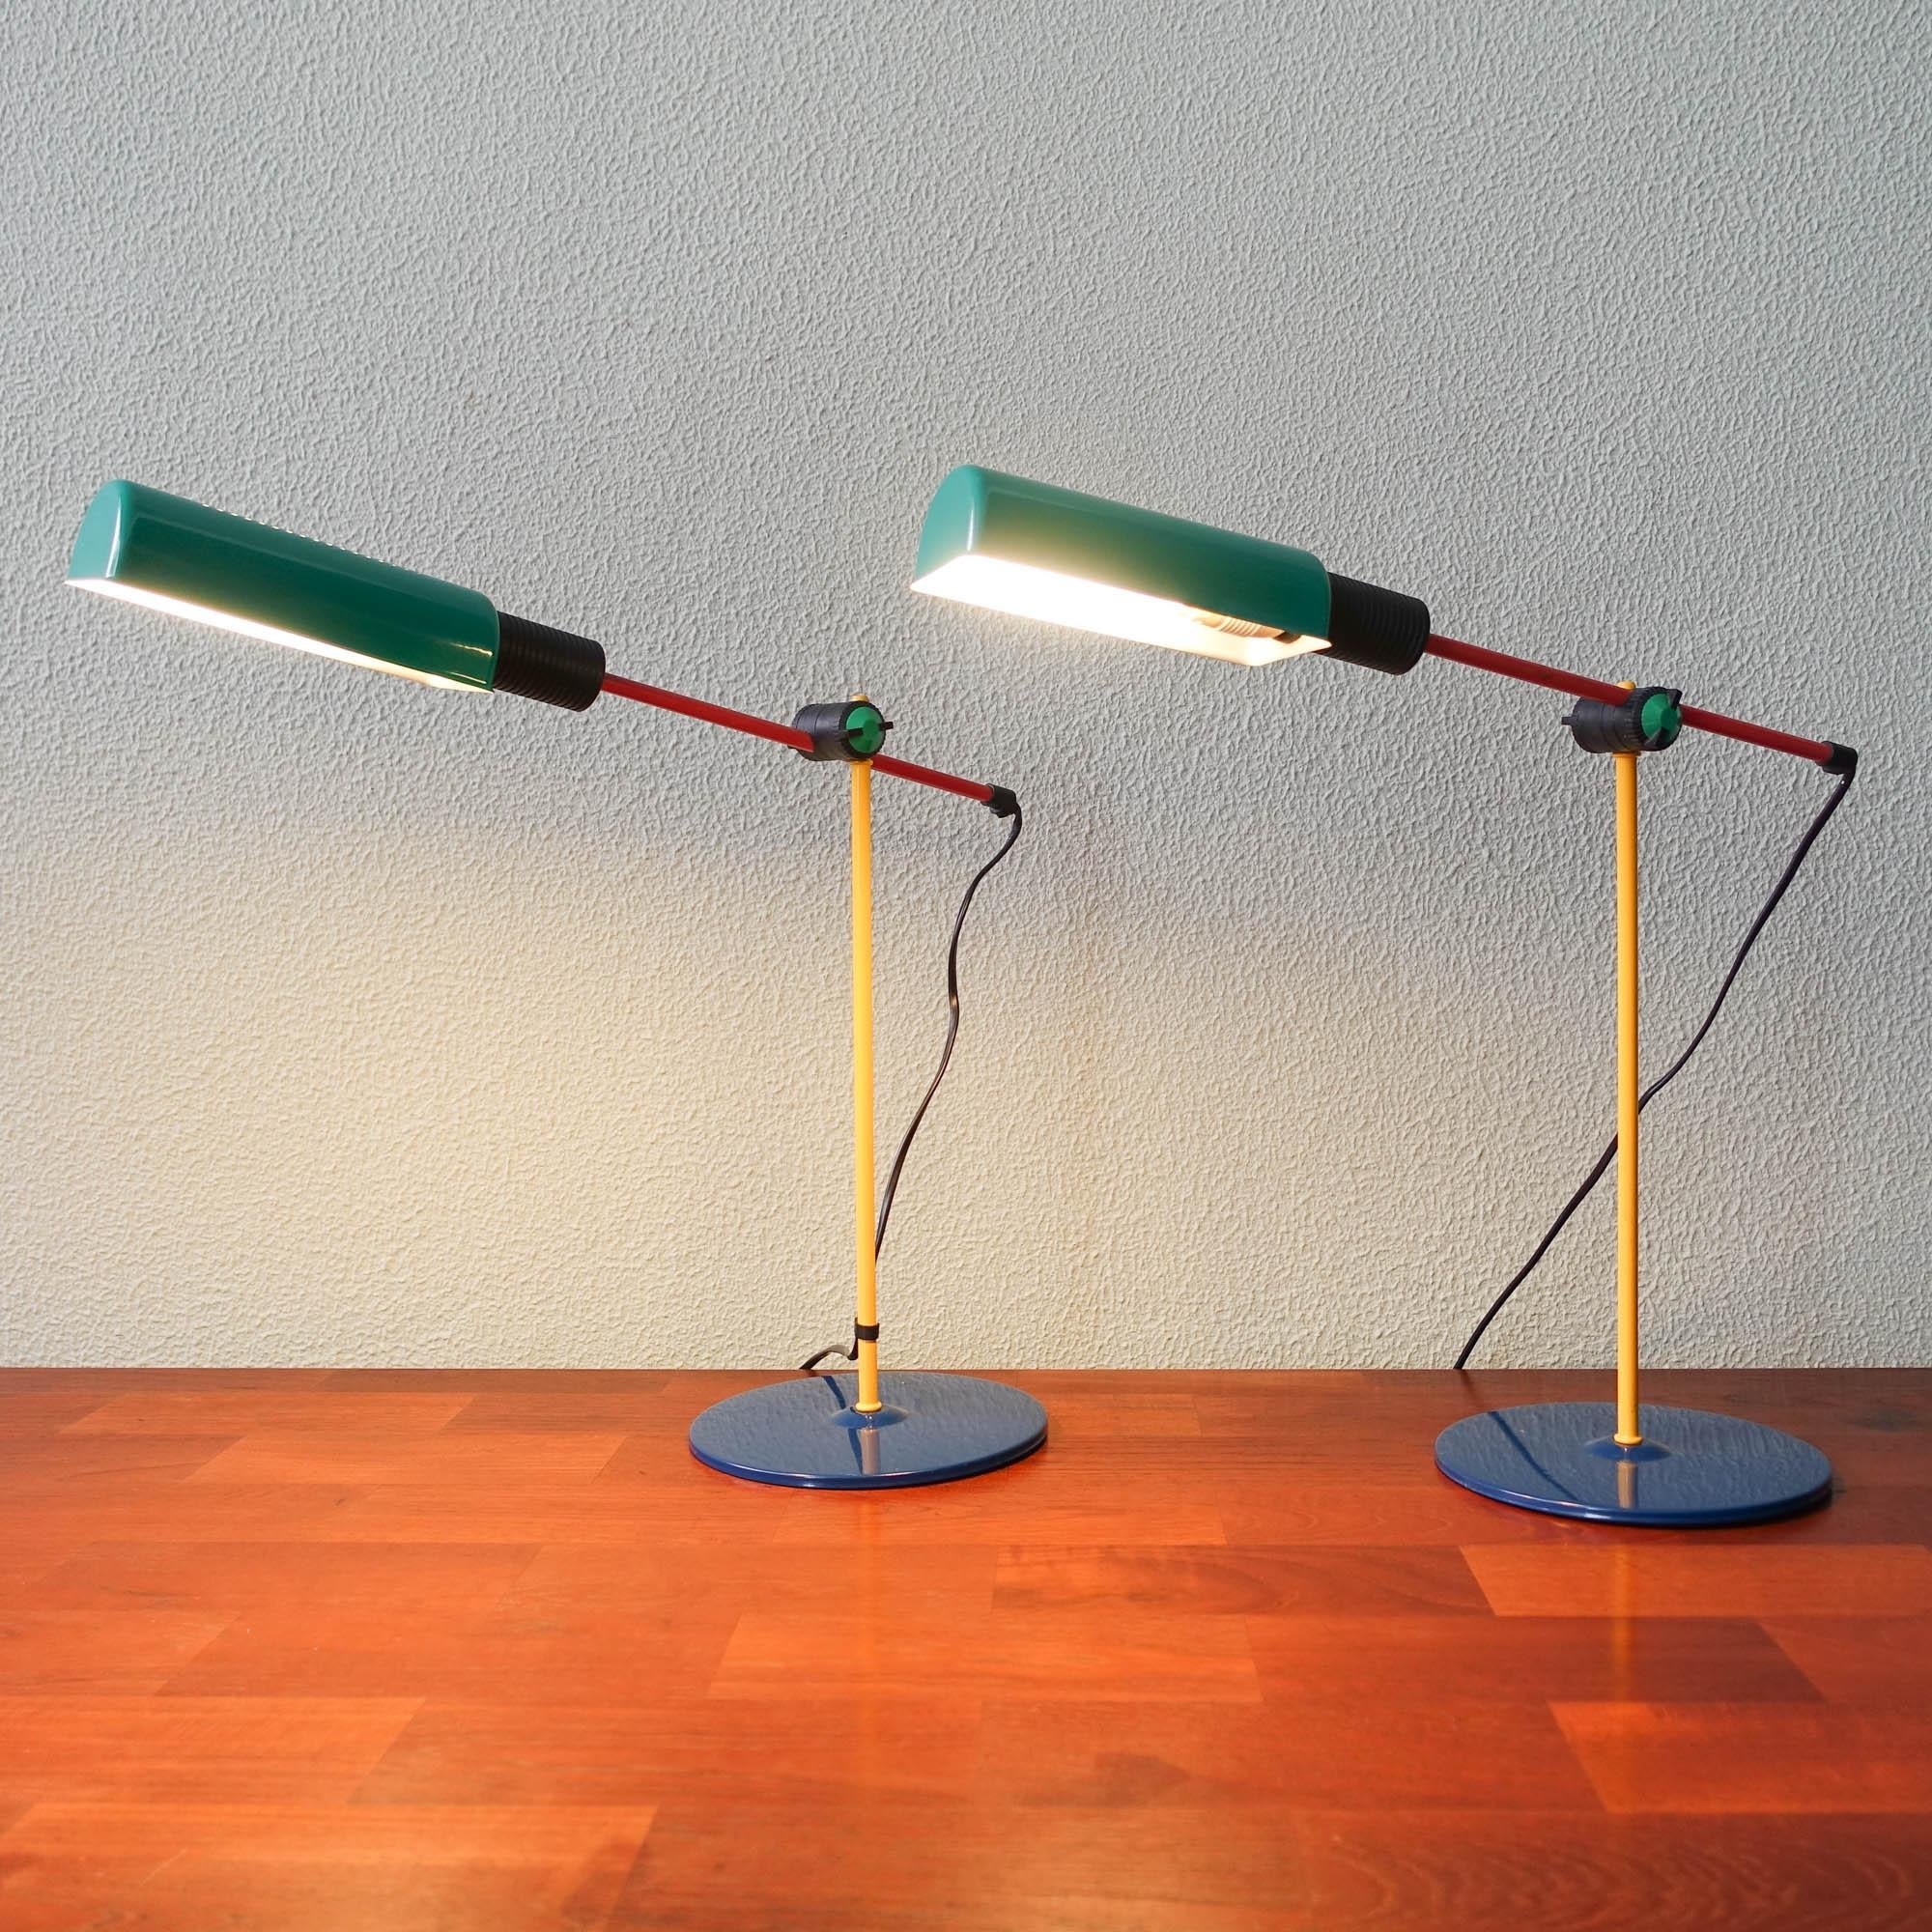 This pair of table lamps were designed and produced by Veneta Lumi in Italy, during the 1980s. Focus and arm are articulated, it is adjustable vertically and horizontally, height and angle. An adjustable and Minimalist modern Italian table lamp from